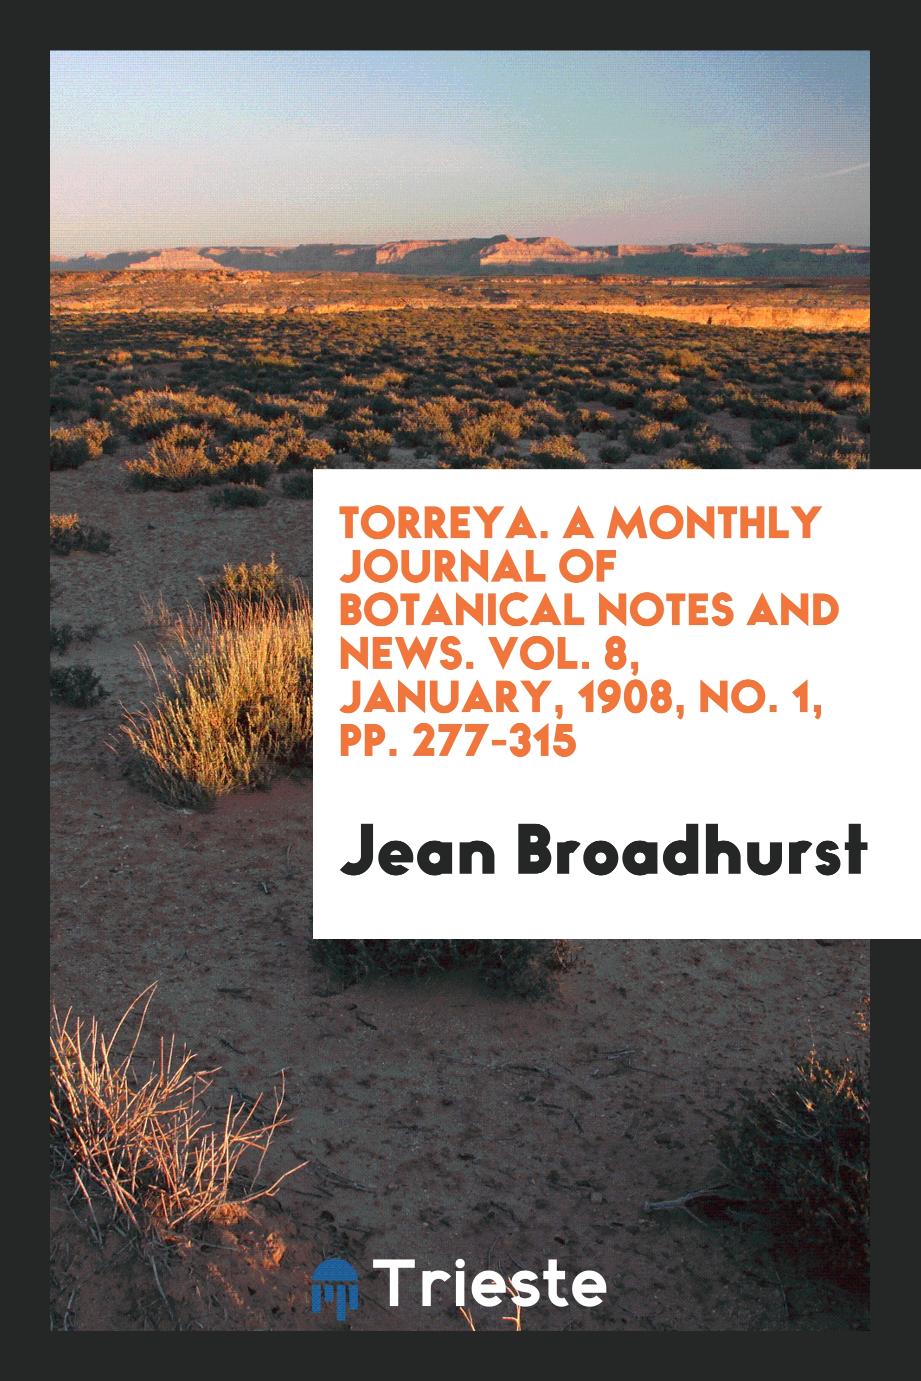 Torreya. A monthly Journal of Botanical Notes and News. Vol. 8, January, 1908, No. 1, pp. 277-315